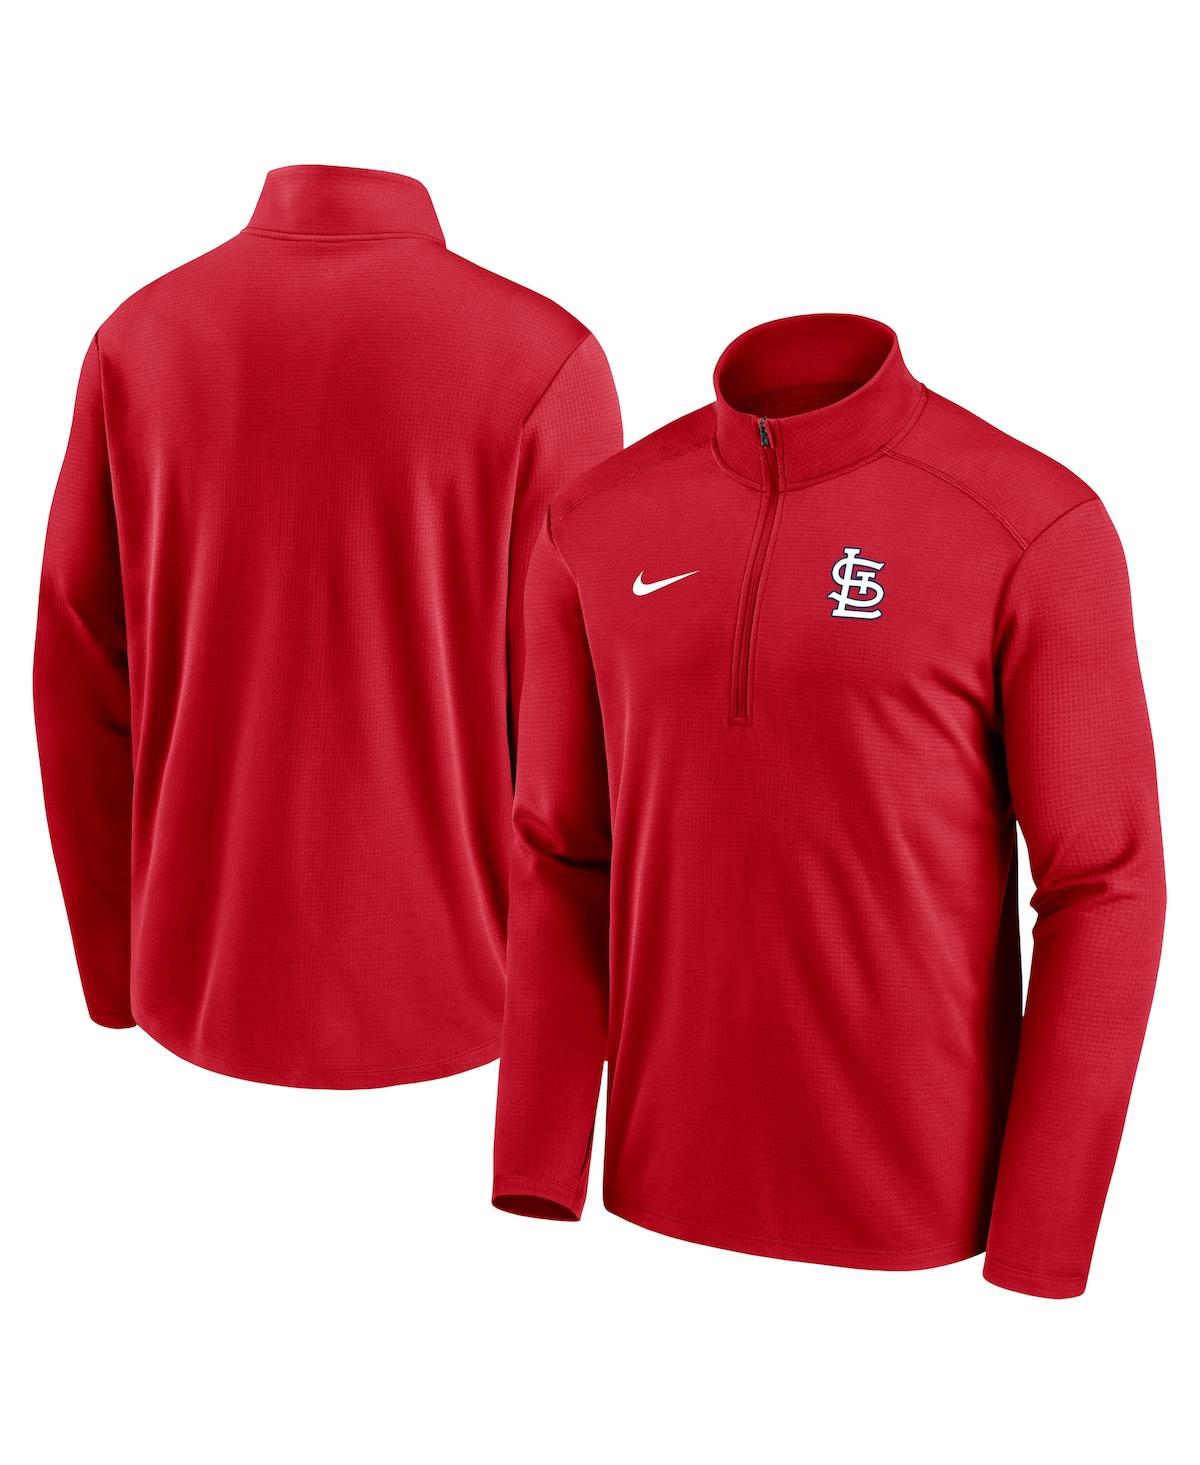 Nike Men's  Red St. Louis Cardinals Agility Pacer Performance Half-zip Top